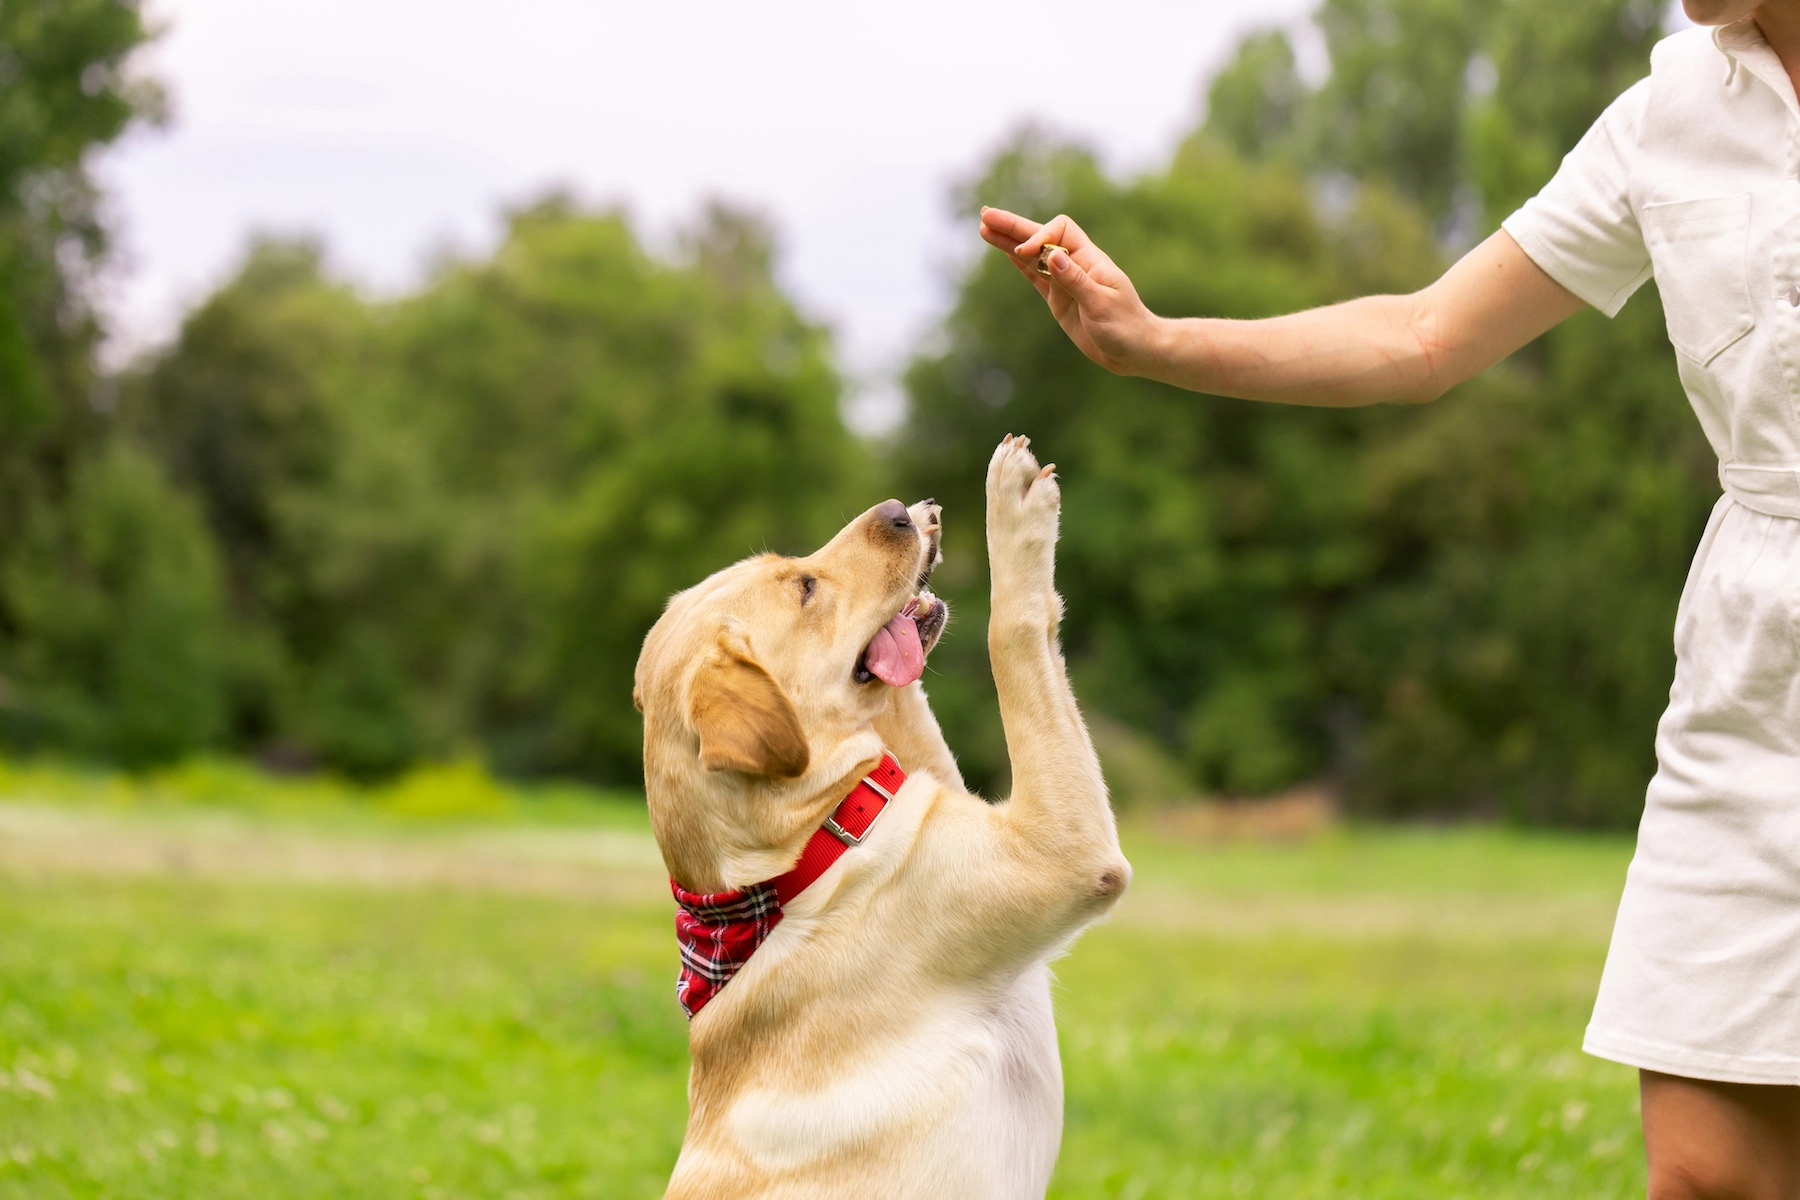 Training Your Dog: Tips and Tricks